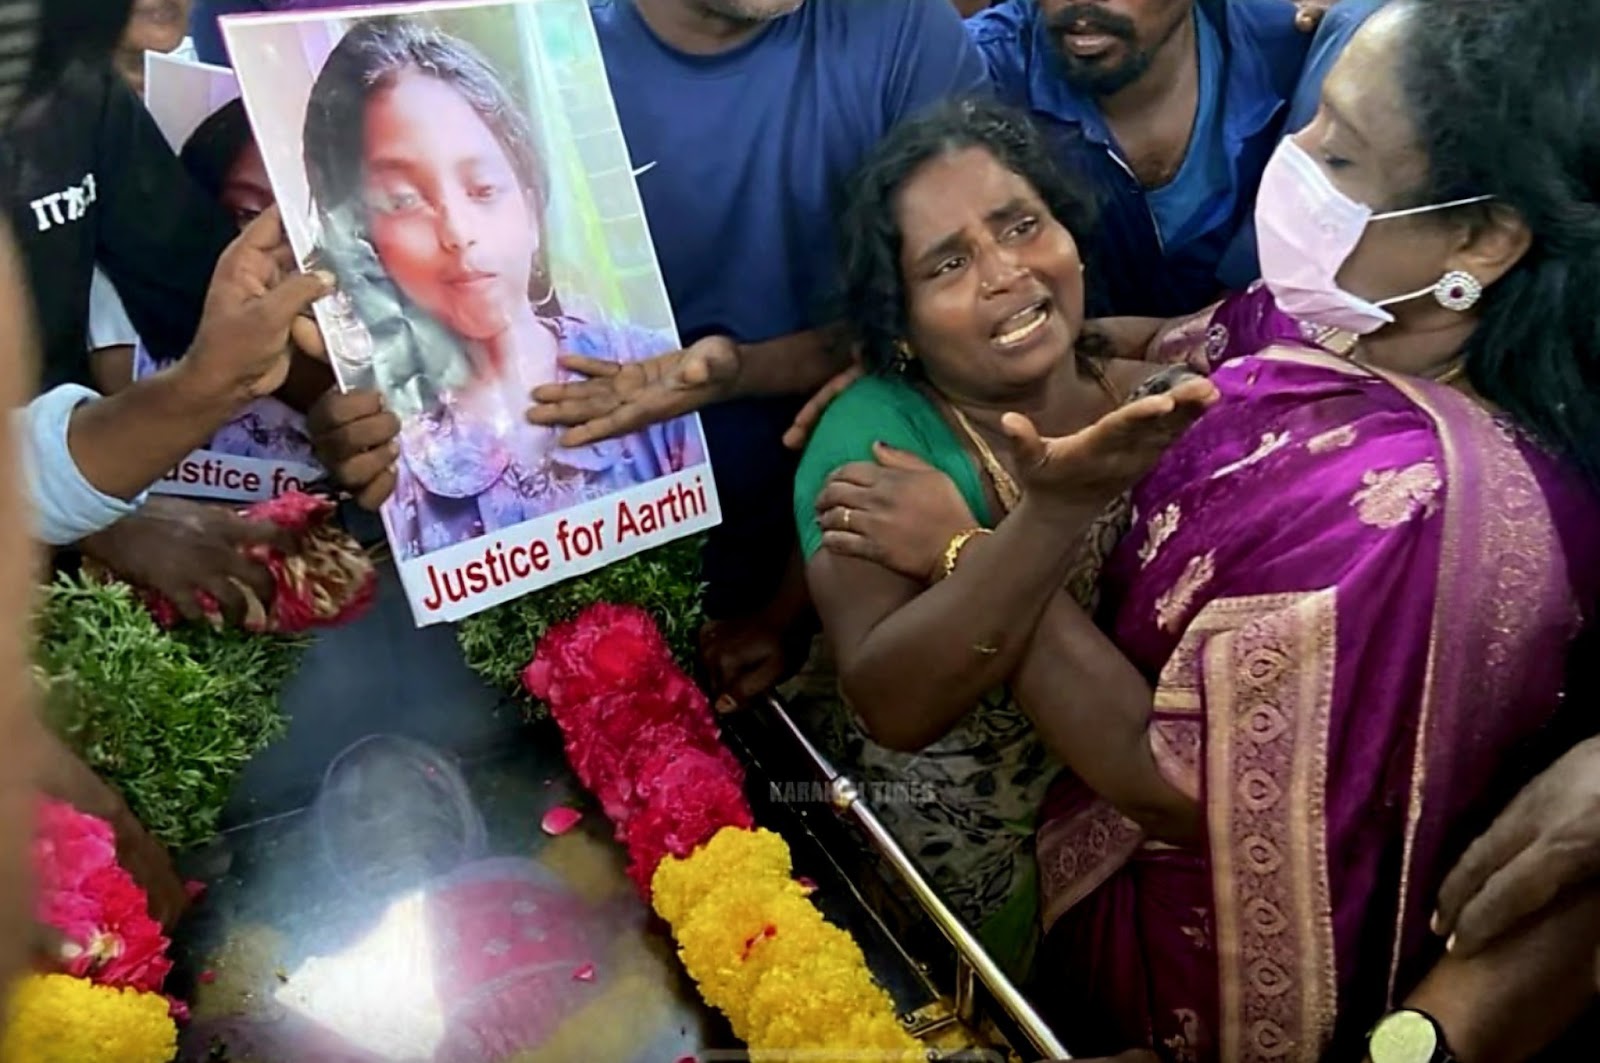 JusticeForAarthi Indians demand justice on Twitter for 9 year old child Aarthi